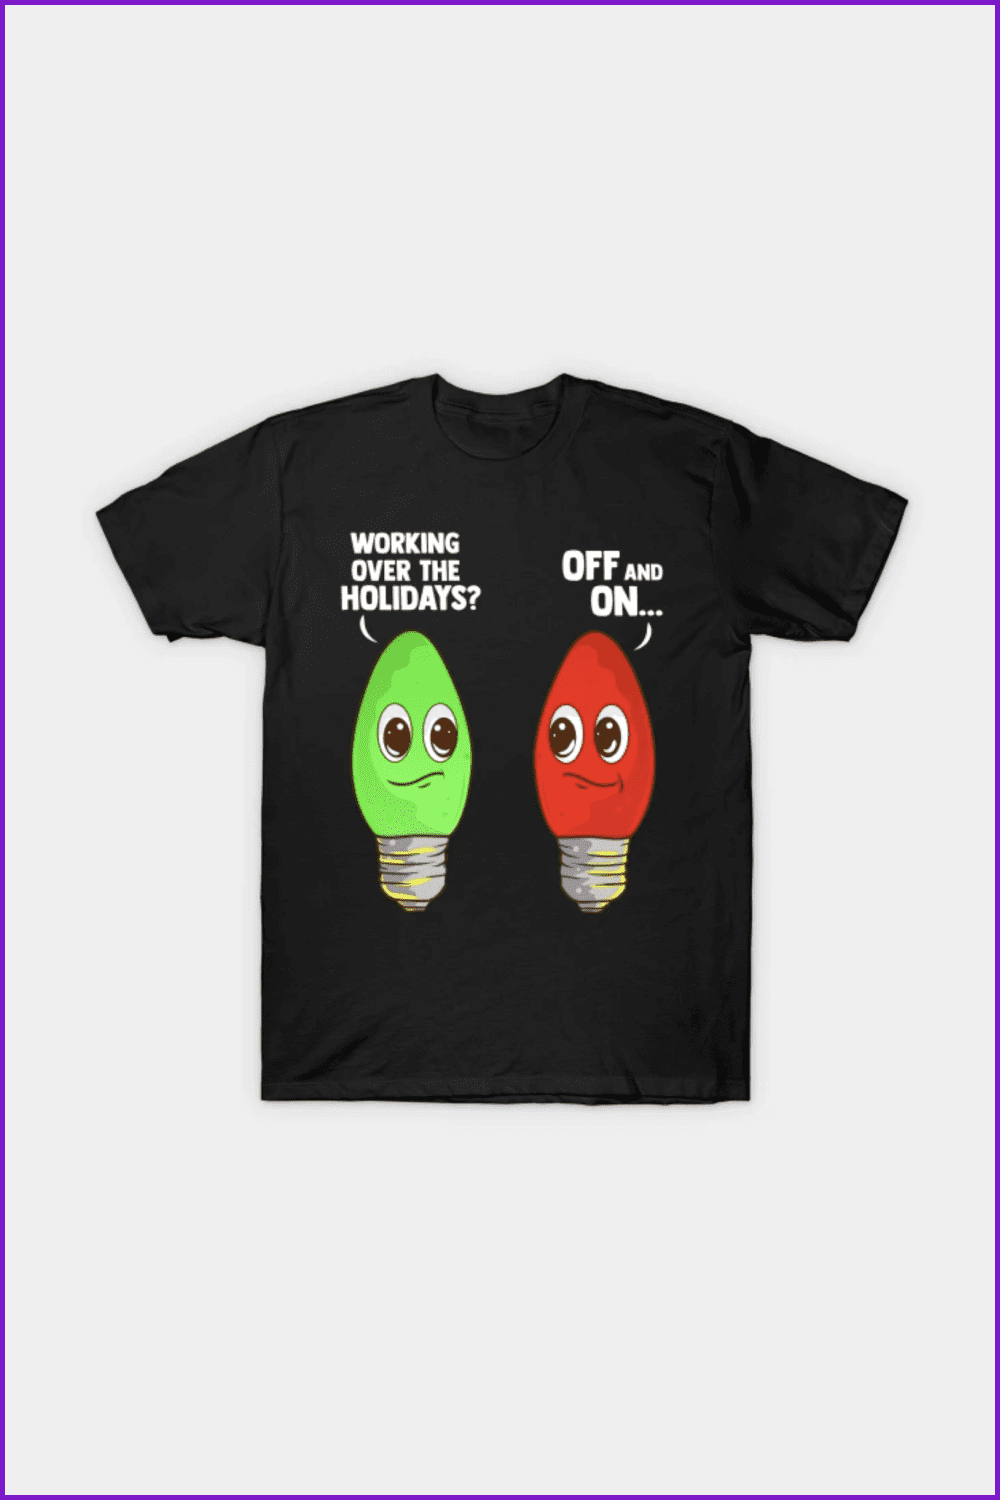 Black t-shirt with green and red lamps.